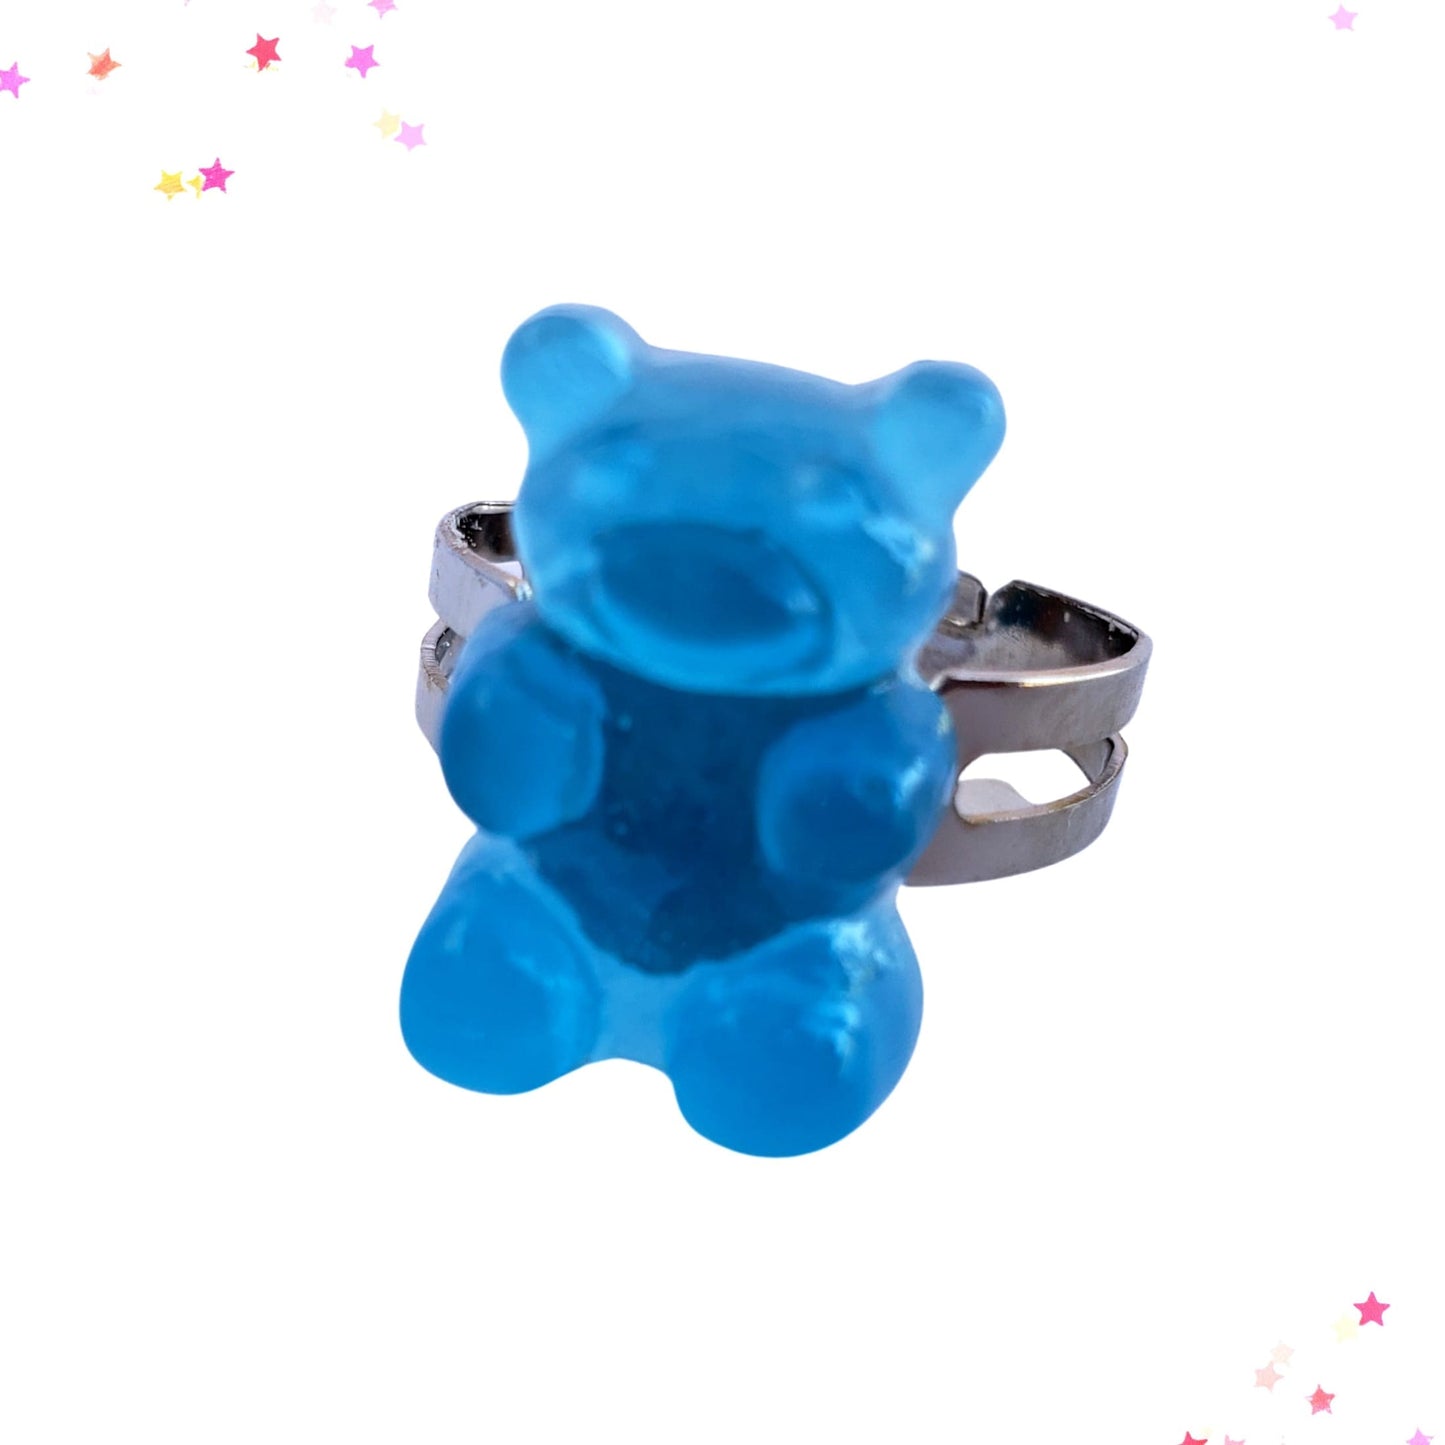 Juicy Gummy Bear Adjustable Ring from Confetti Kitty, Only 1.99